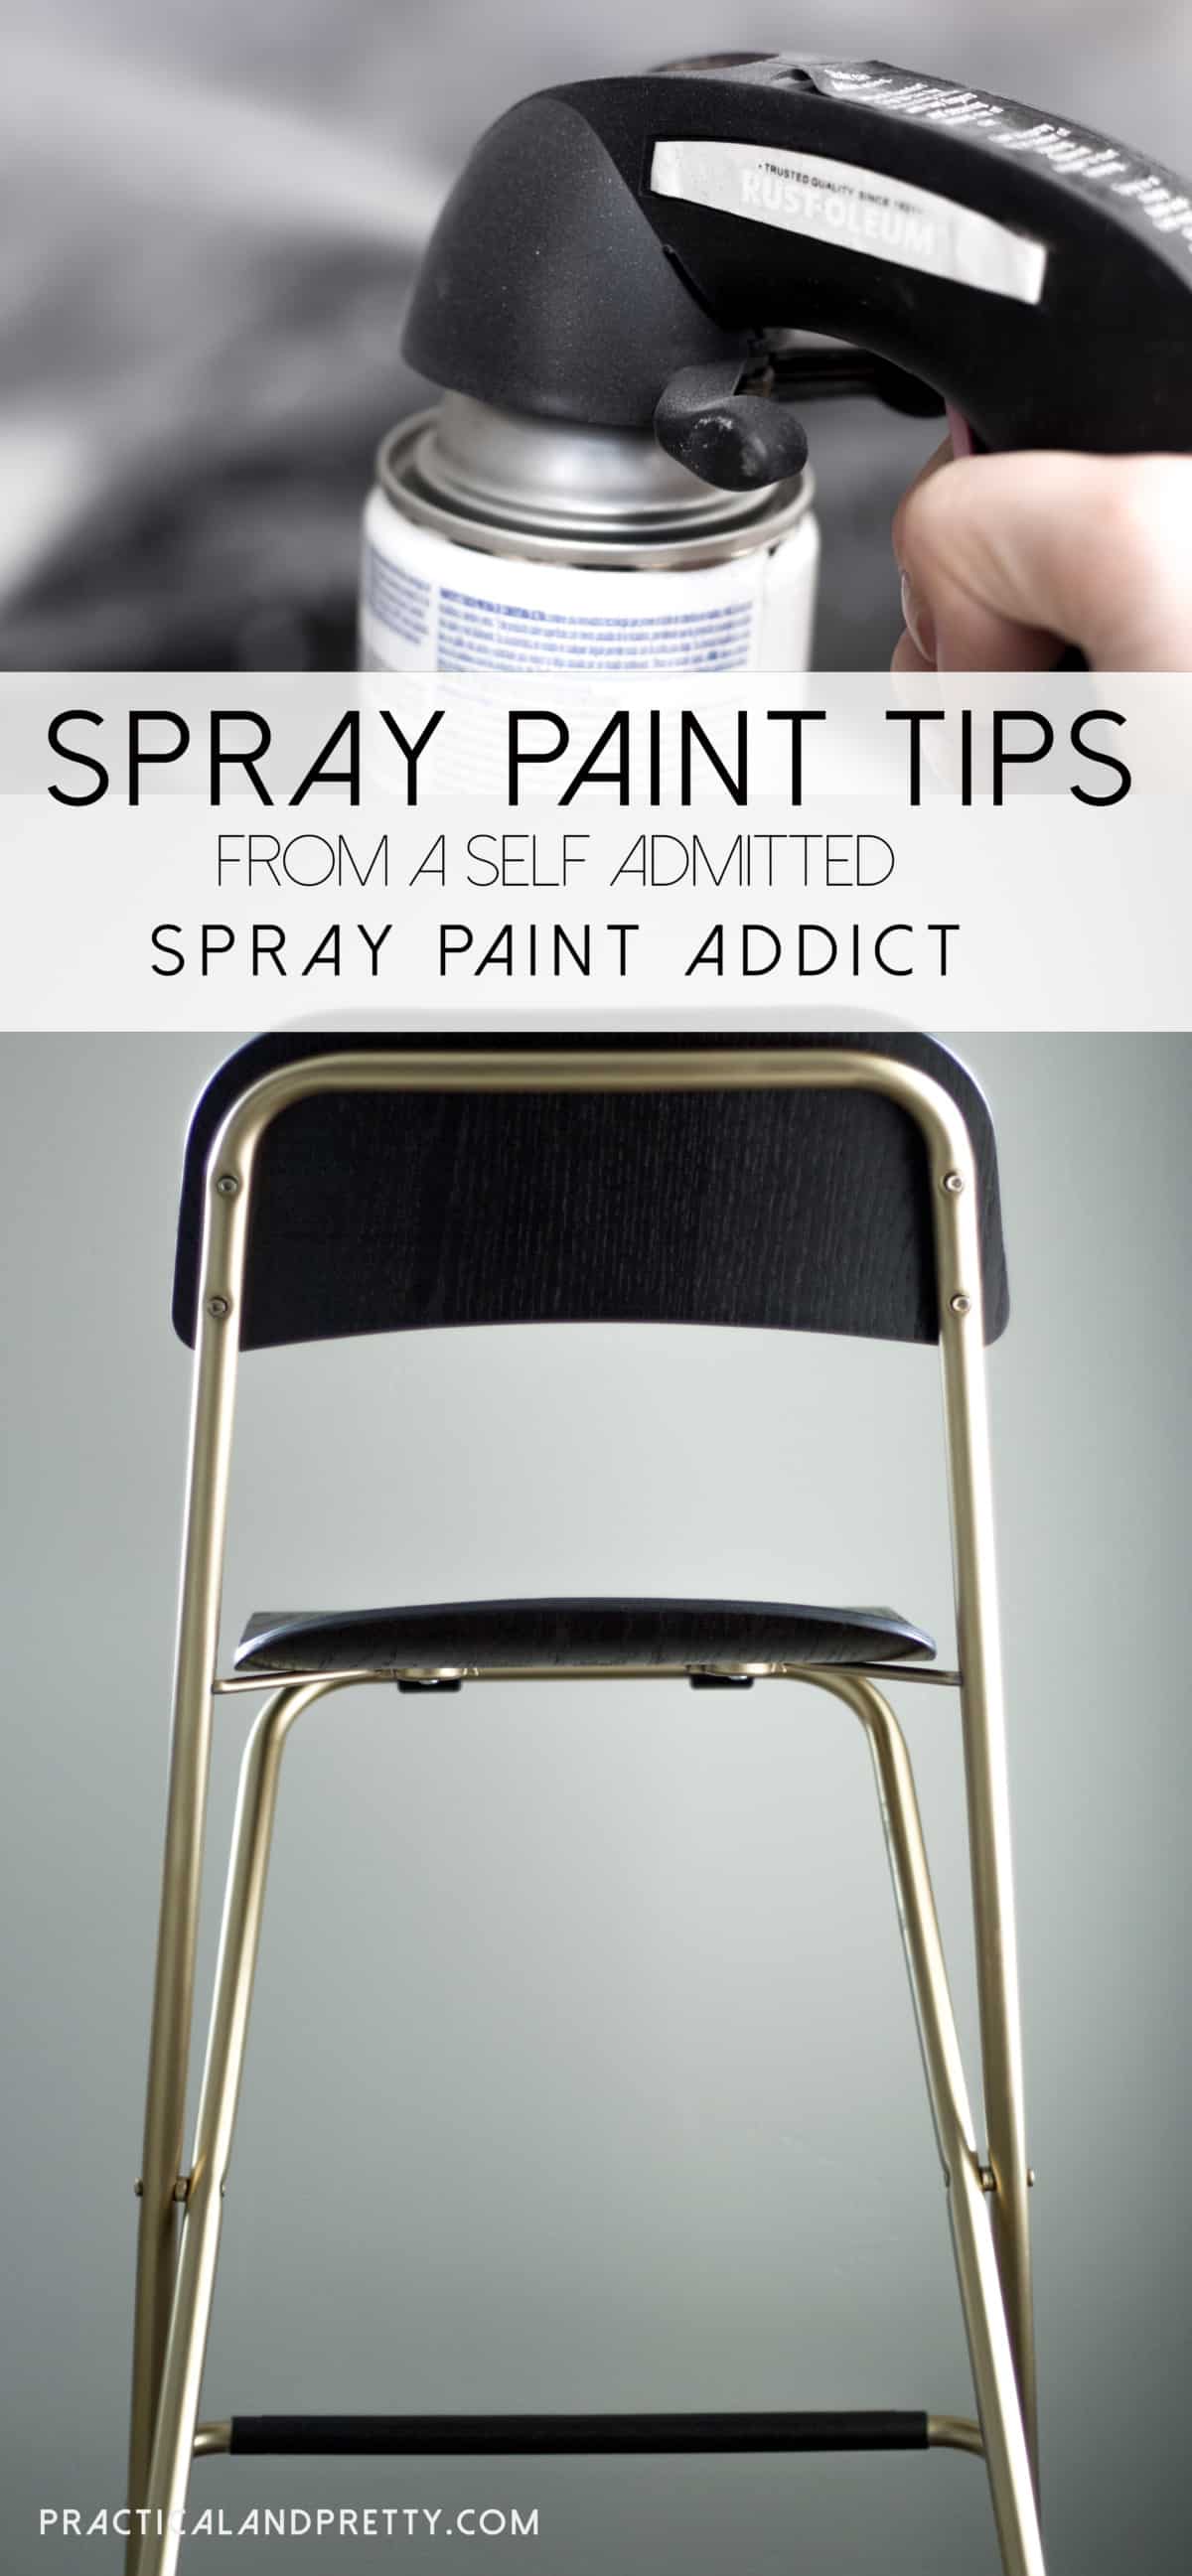 These spray paint tips will get you DIYing like the pros. Spray painting is my favorite way to make old things new again!